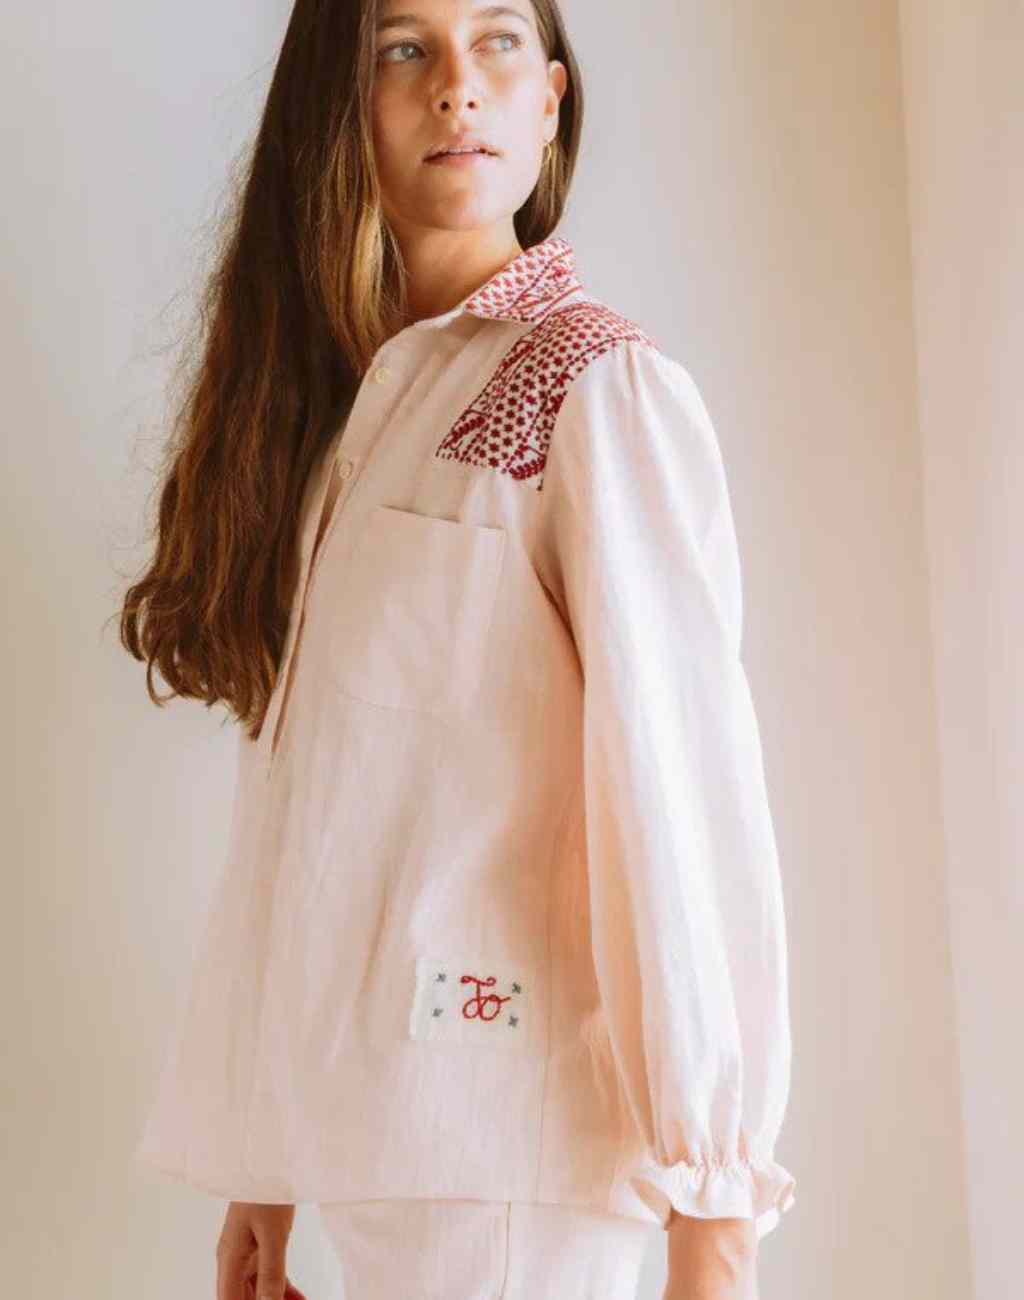 Textured Cotton Shirt with Embroidery Details - Visit Nifty JoSephine 